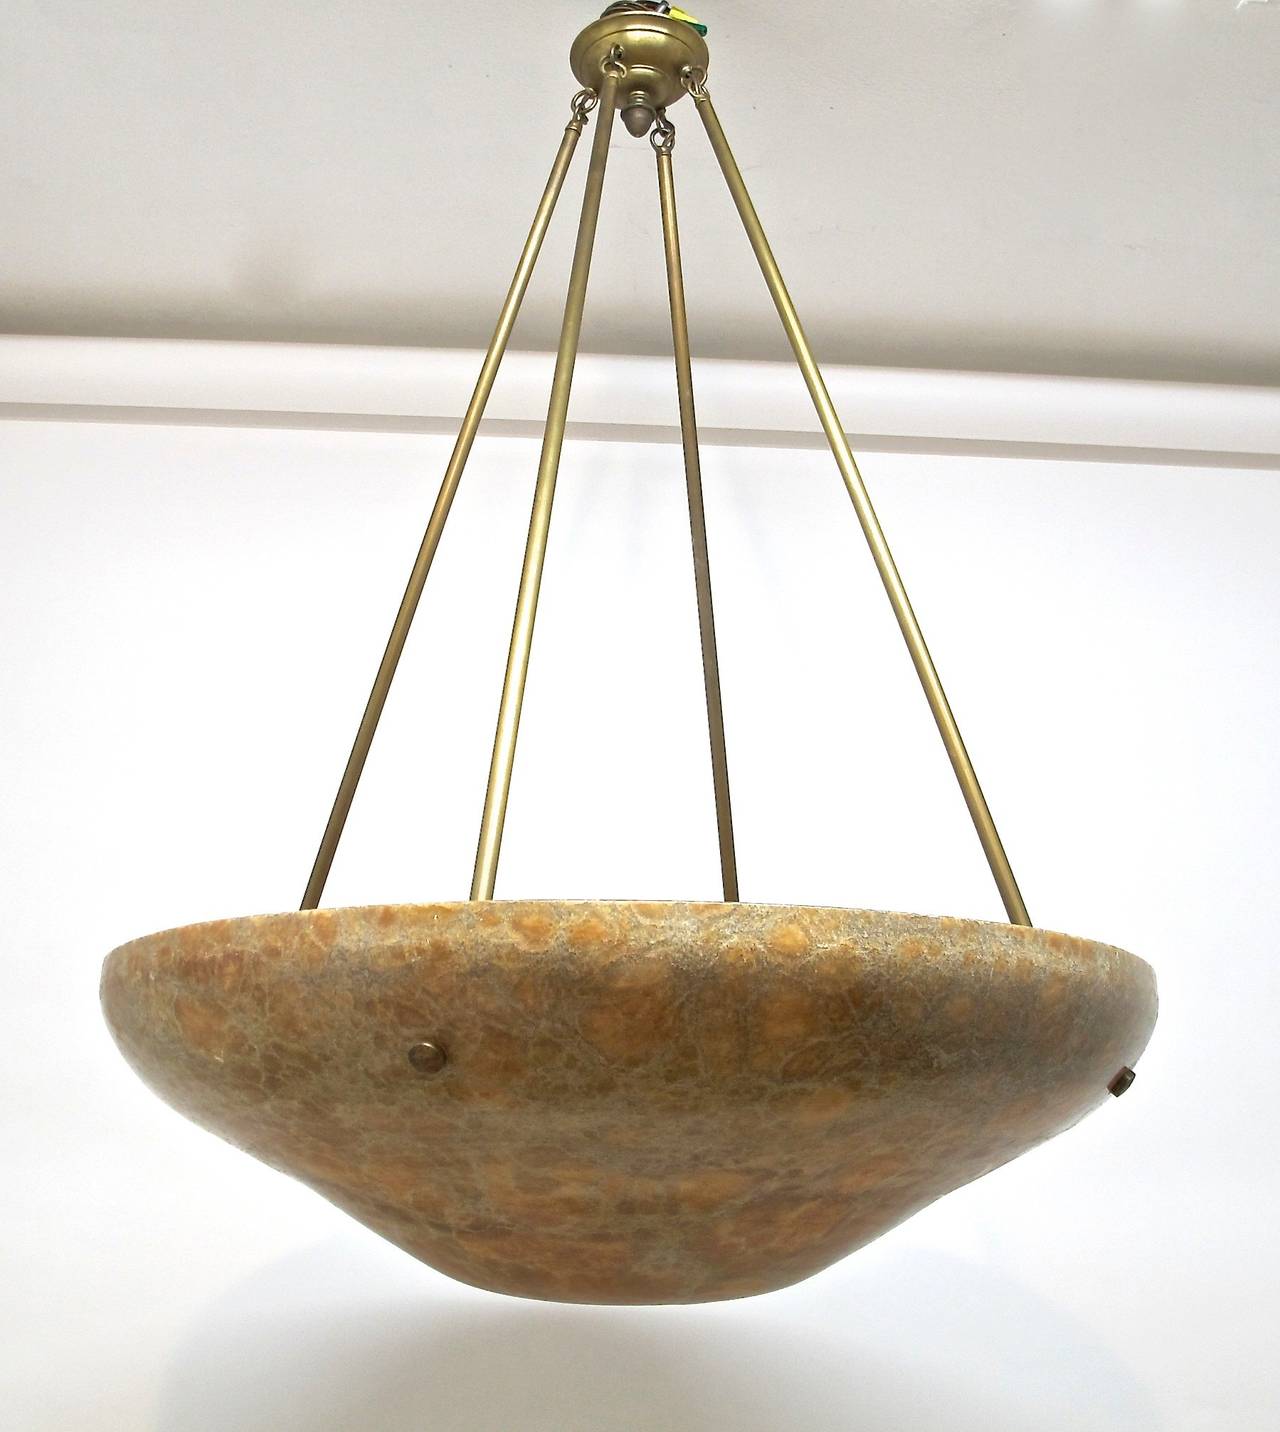 Large scale and dramatic amber colored alabaster bowl pendant light fixture. Newly re-wired.